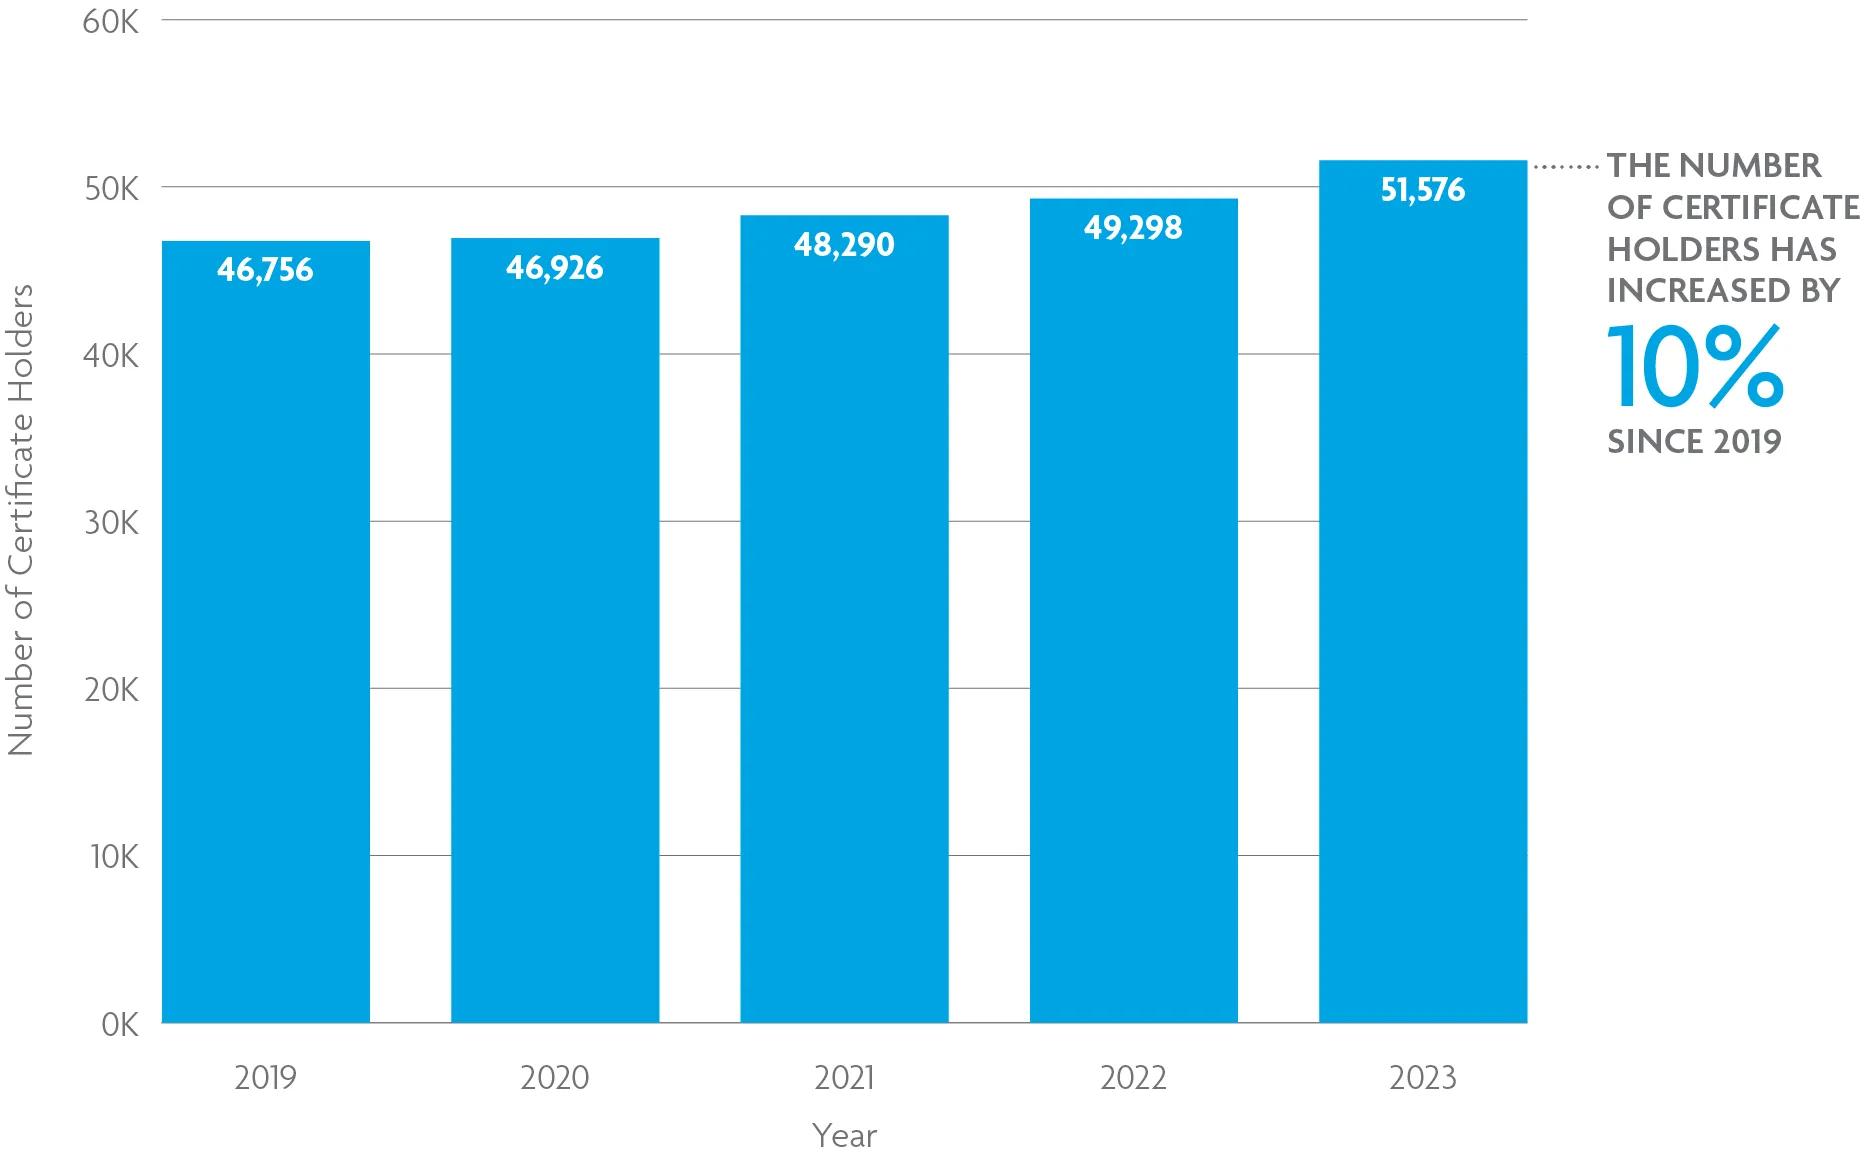 A bar chart shows that the number of Certificate holders rose to 51,576 in 2023. For help with data accessibility, contact communications@ncarb.org.